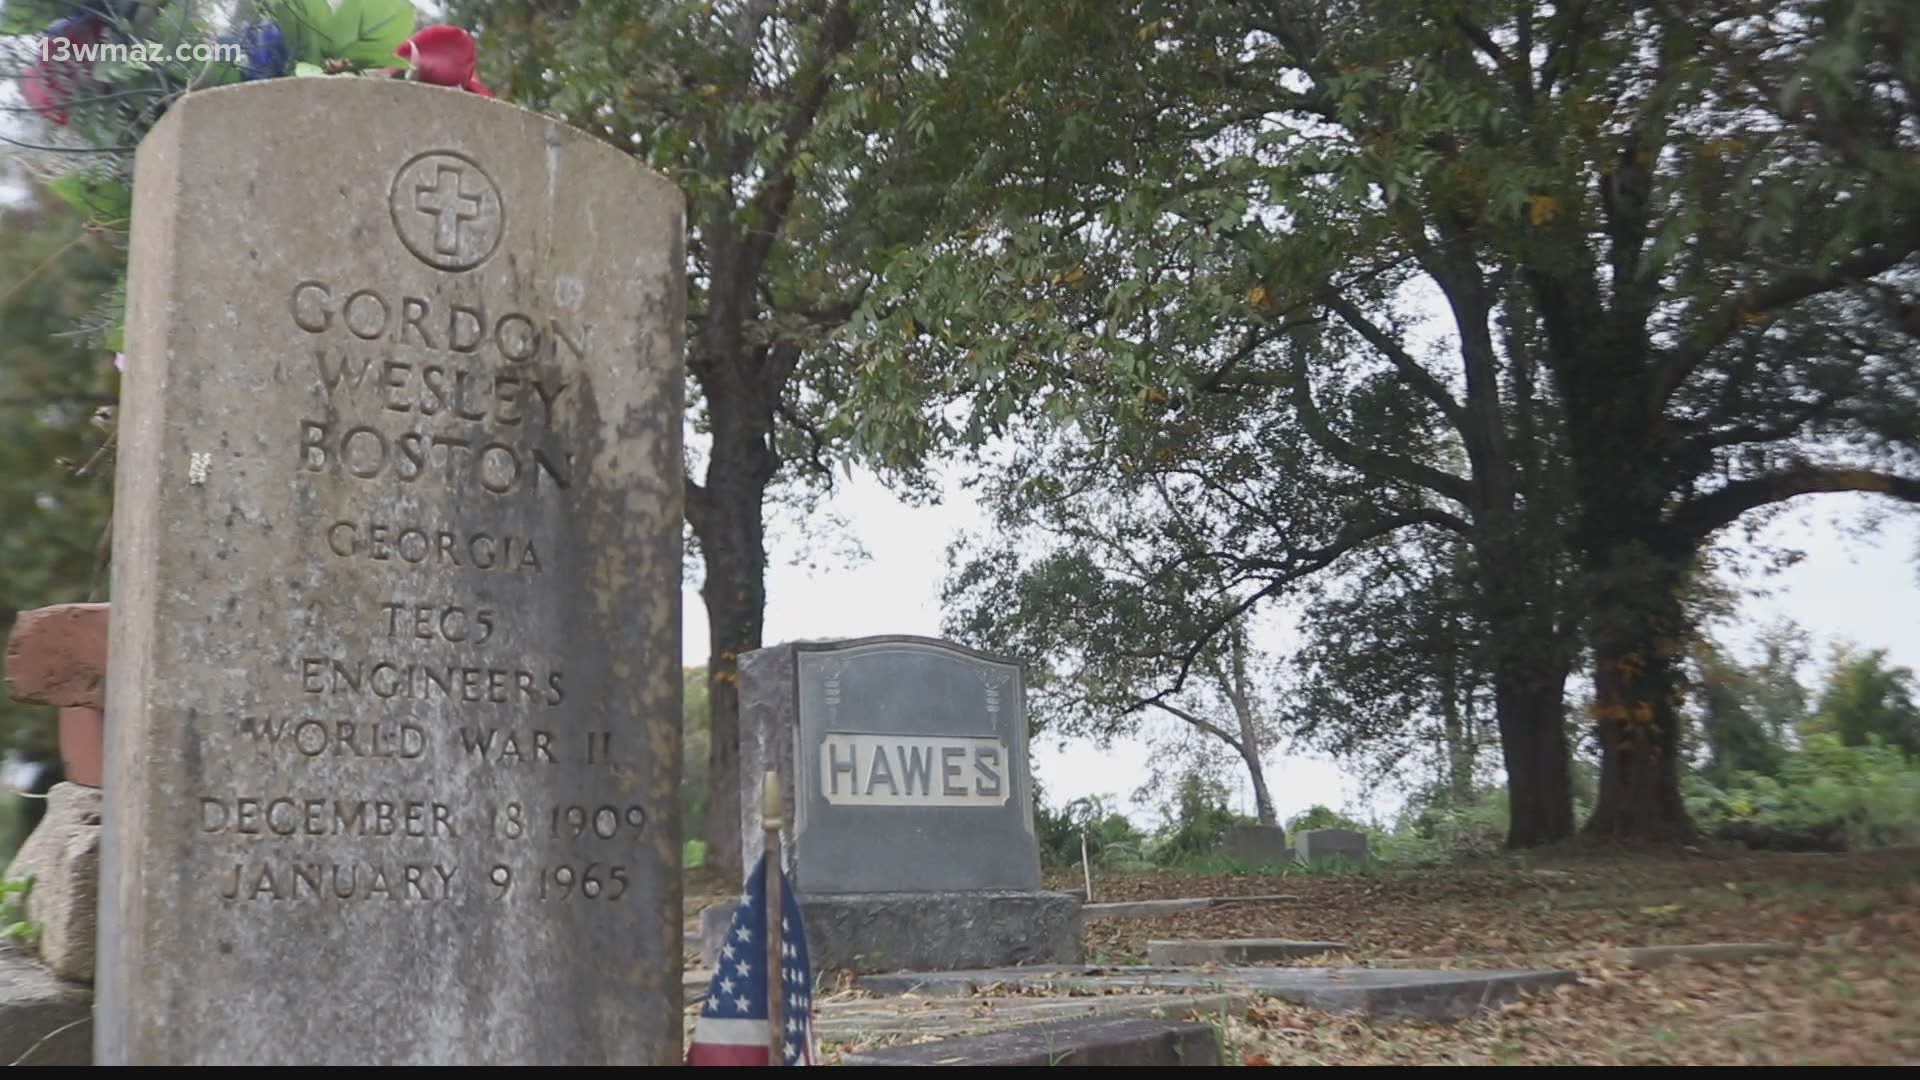 Since 1894, many of Macon's veterans have been laid to rest at the historic Linwood Cemetery